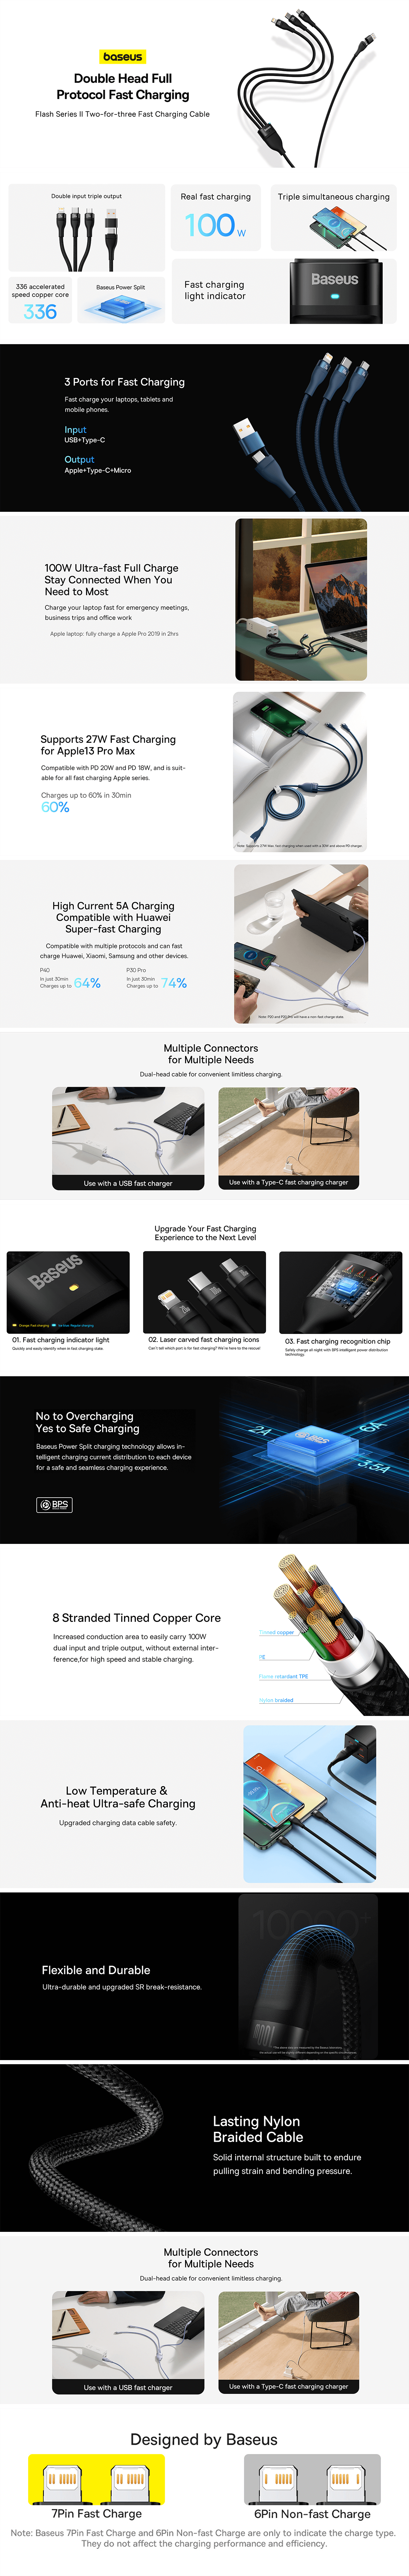 Baseus 100W Flash Series Multi Charging 3 in 1 Cable, Fast Charging USB Type C, Micro USB & USB to Lightning Cable 1.2m